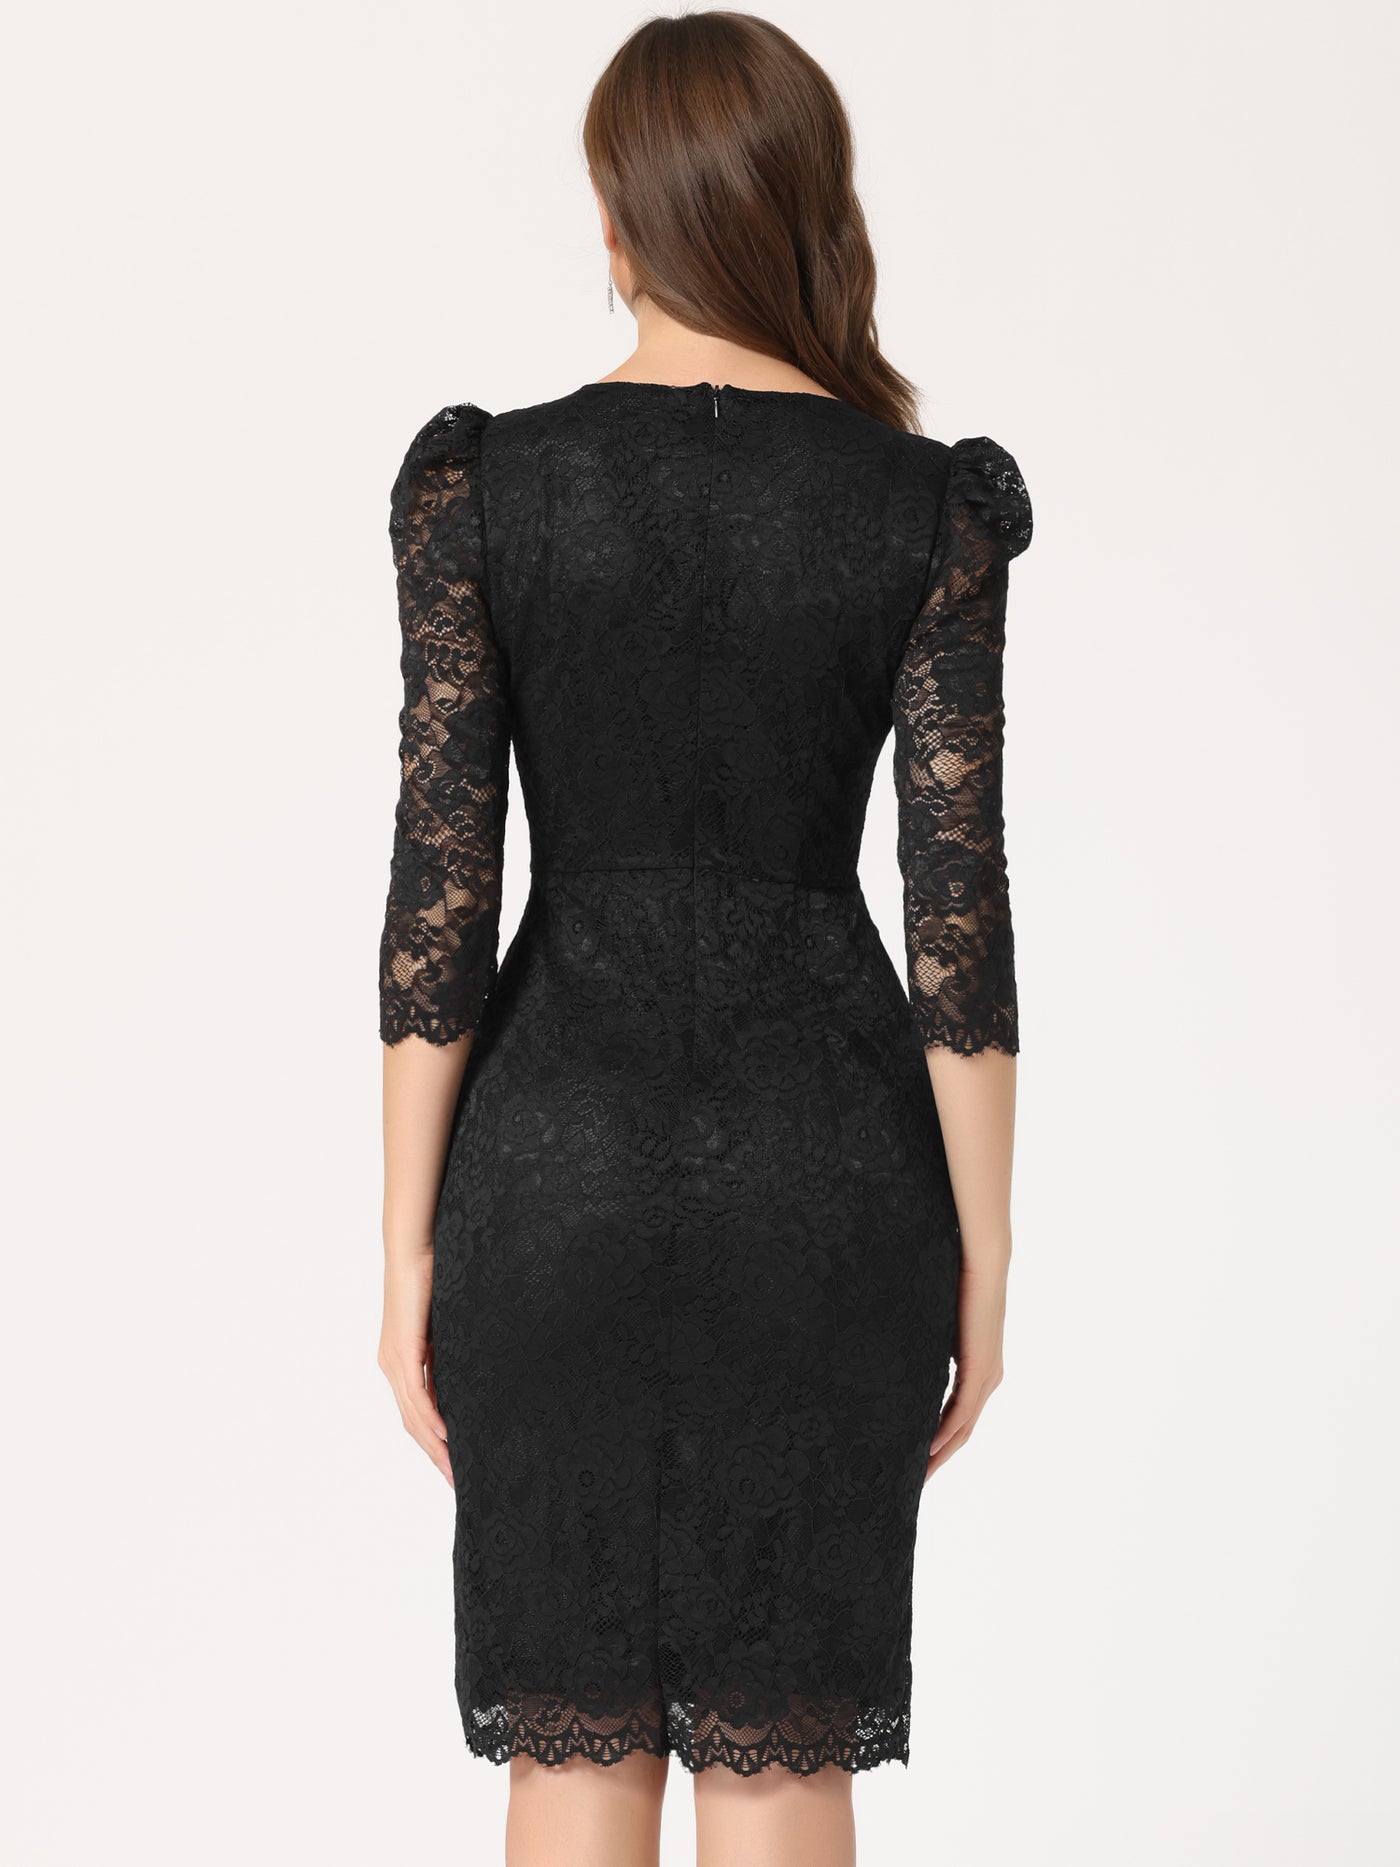 Allegra K Lace Floral Crew Neck 3/4 Sleeve Bodycon Guest Cocktail Dress